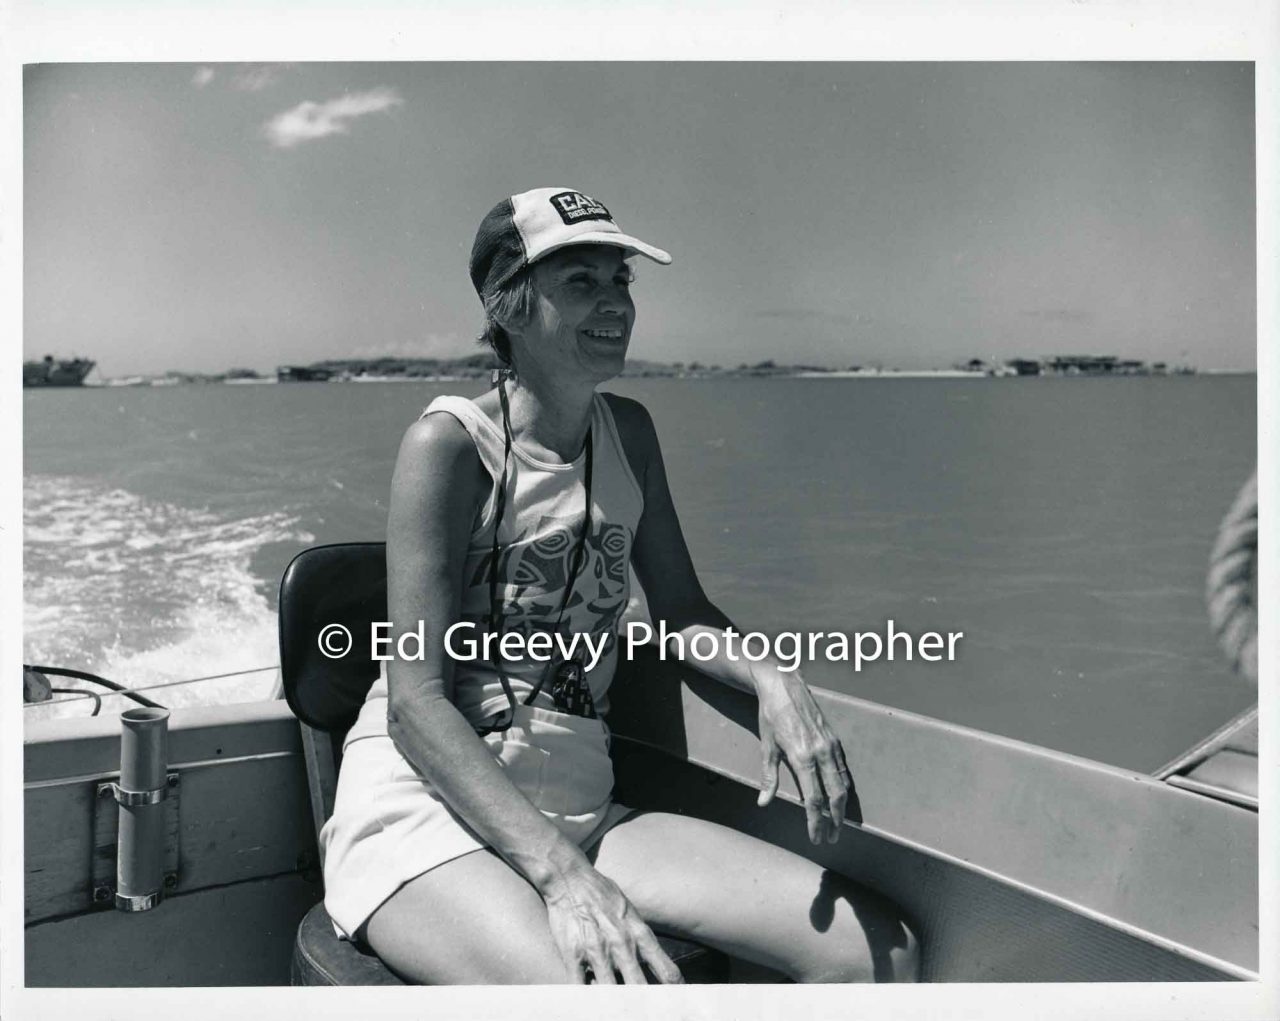 Anthropologist and political activist Marion Kelly returns from working on Mokauea Island. (8 April 1979) Negative: 4050-5-4